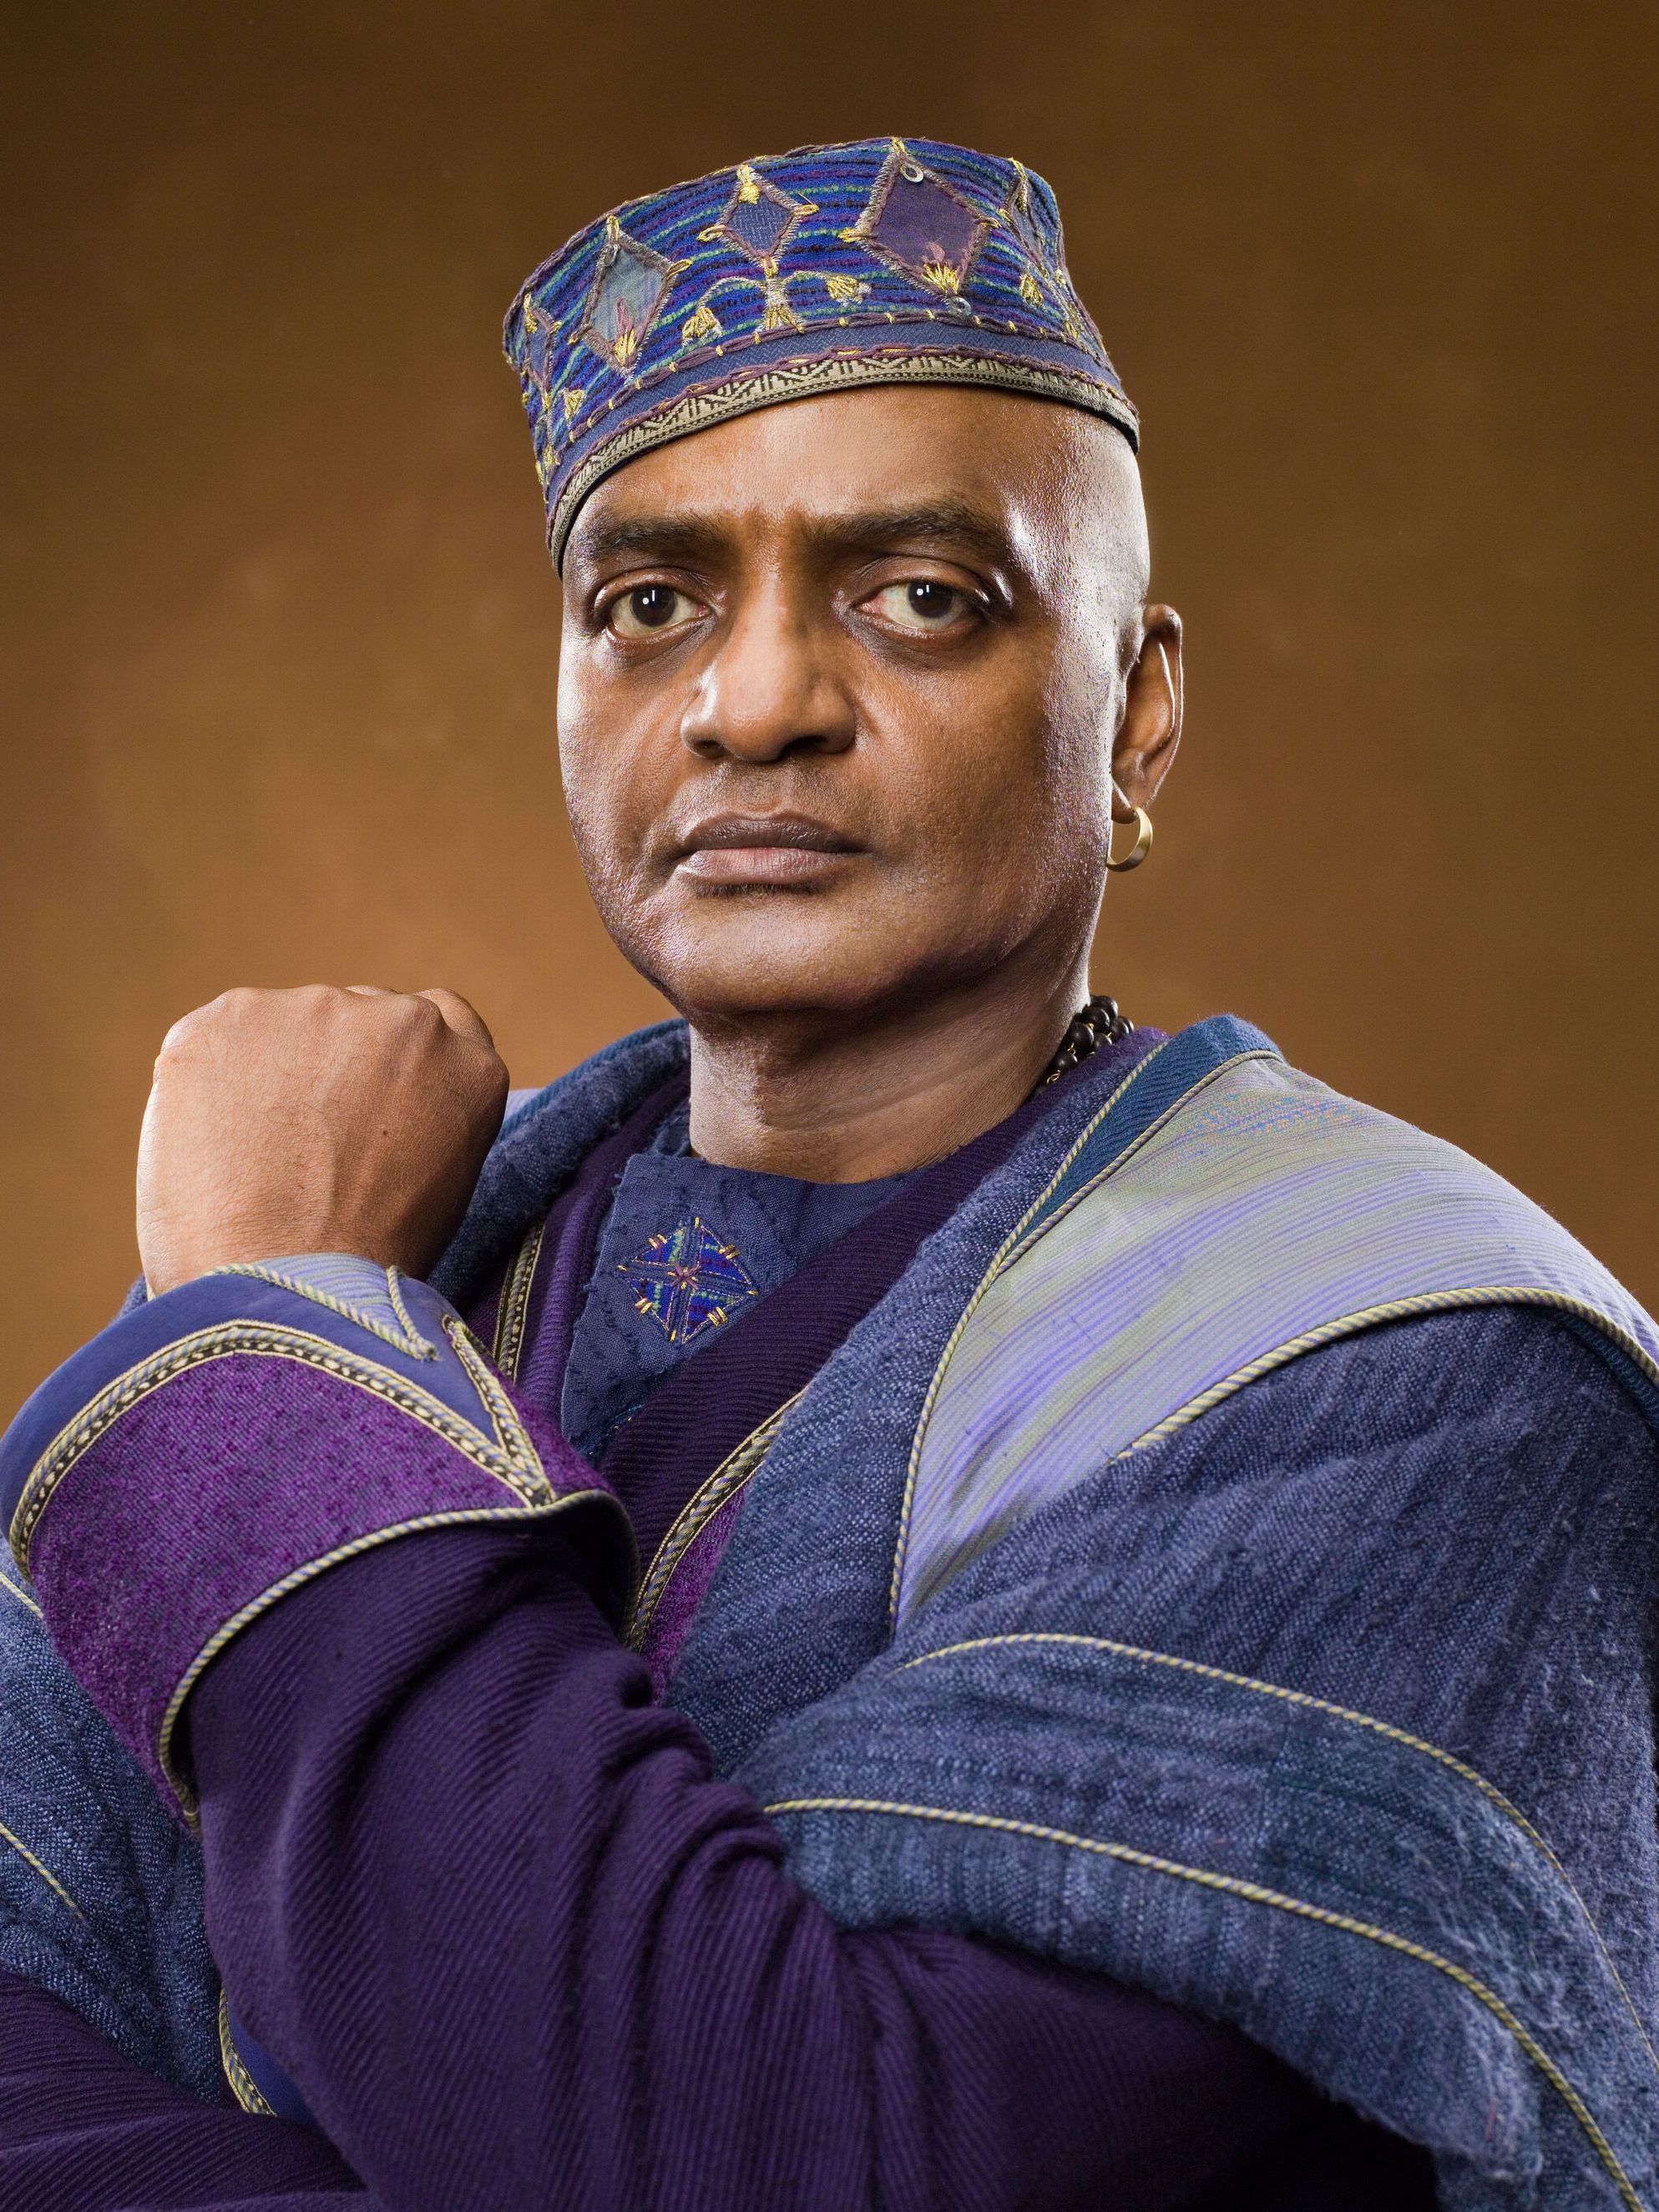 Who Played Kingsley Shacklebolt In The Harry Potter Series?